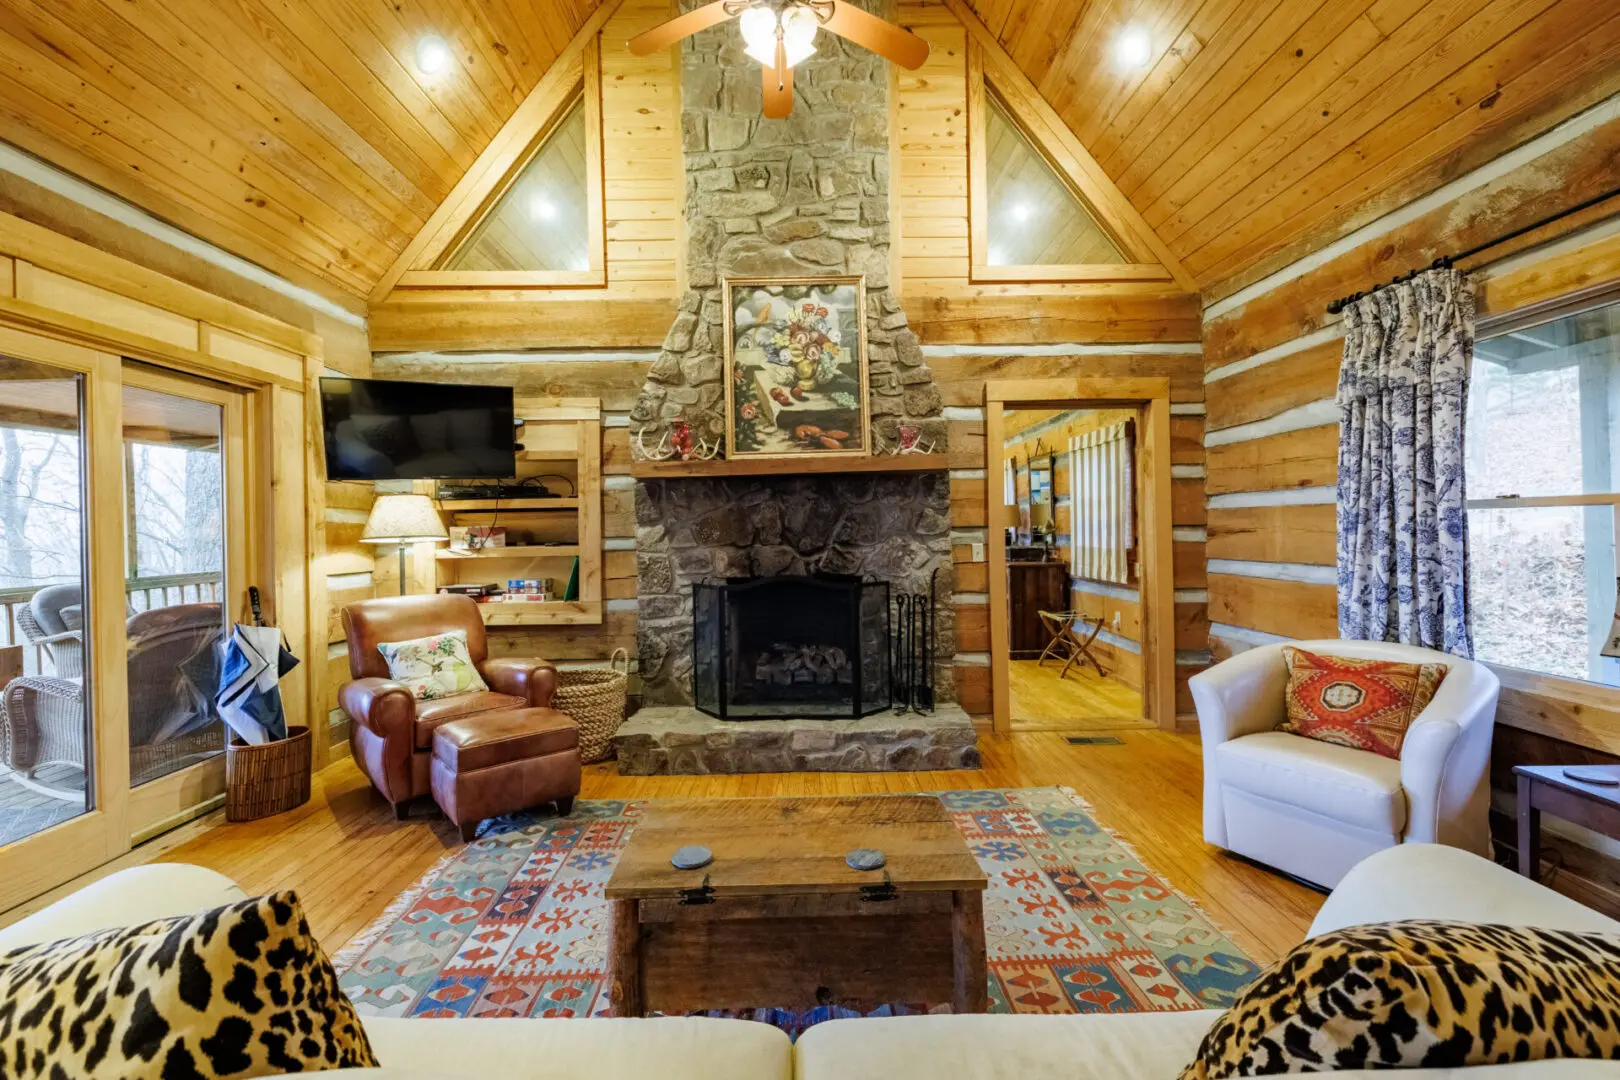 A living room in a log cabin with a fireplace.